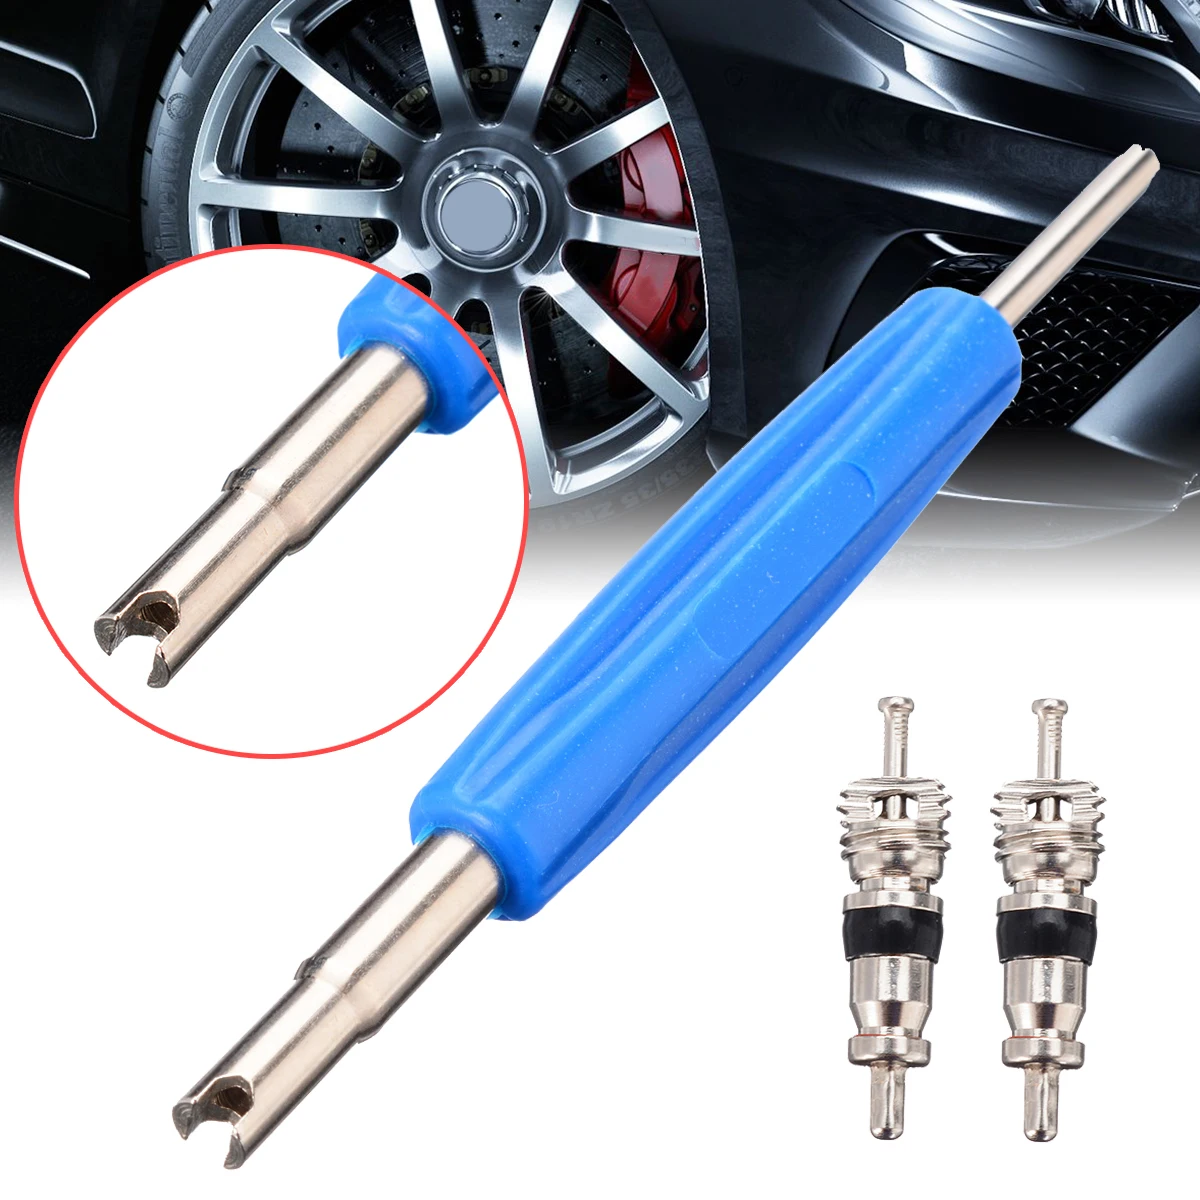 1pcs Car Tyre Valve Stem Core Wrench Remover Puller Tire Repair Tool Universal